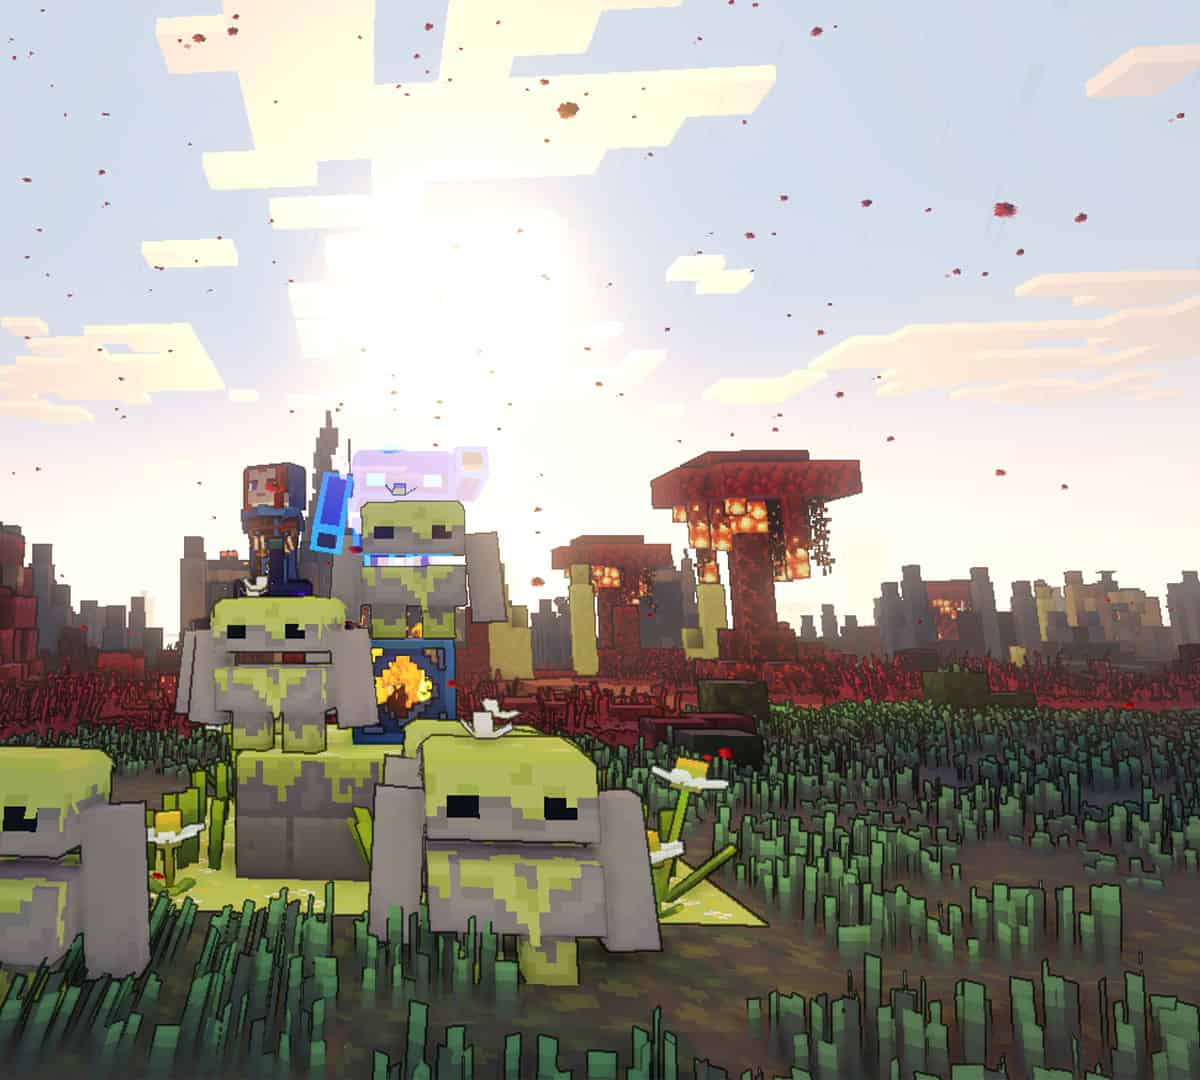 Minecraft Legends melodies: The player character stood on a spawner by some stone creatures.